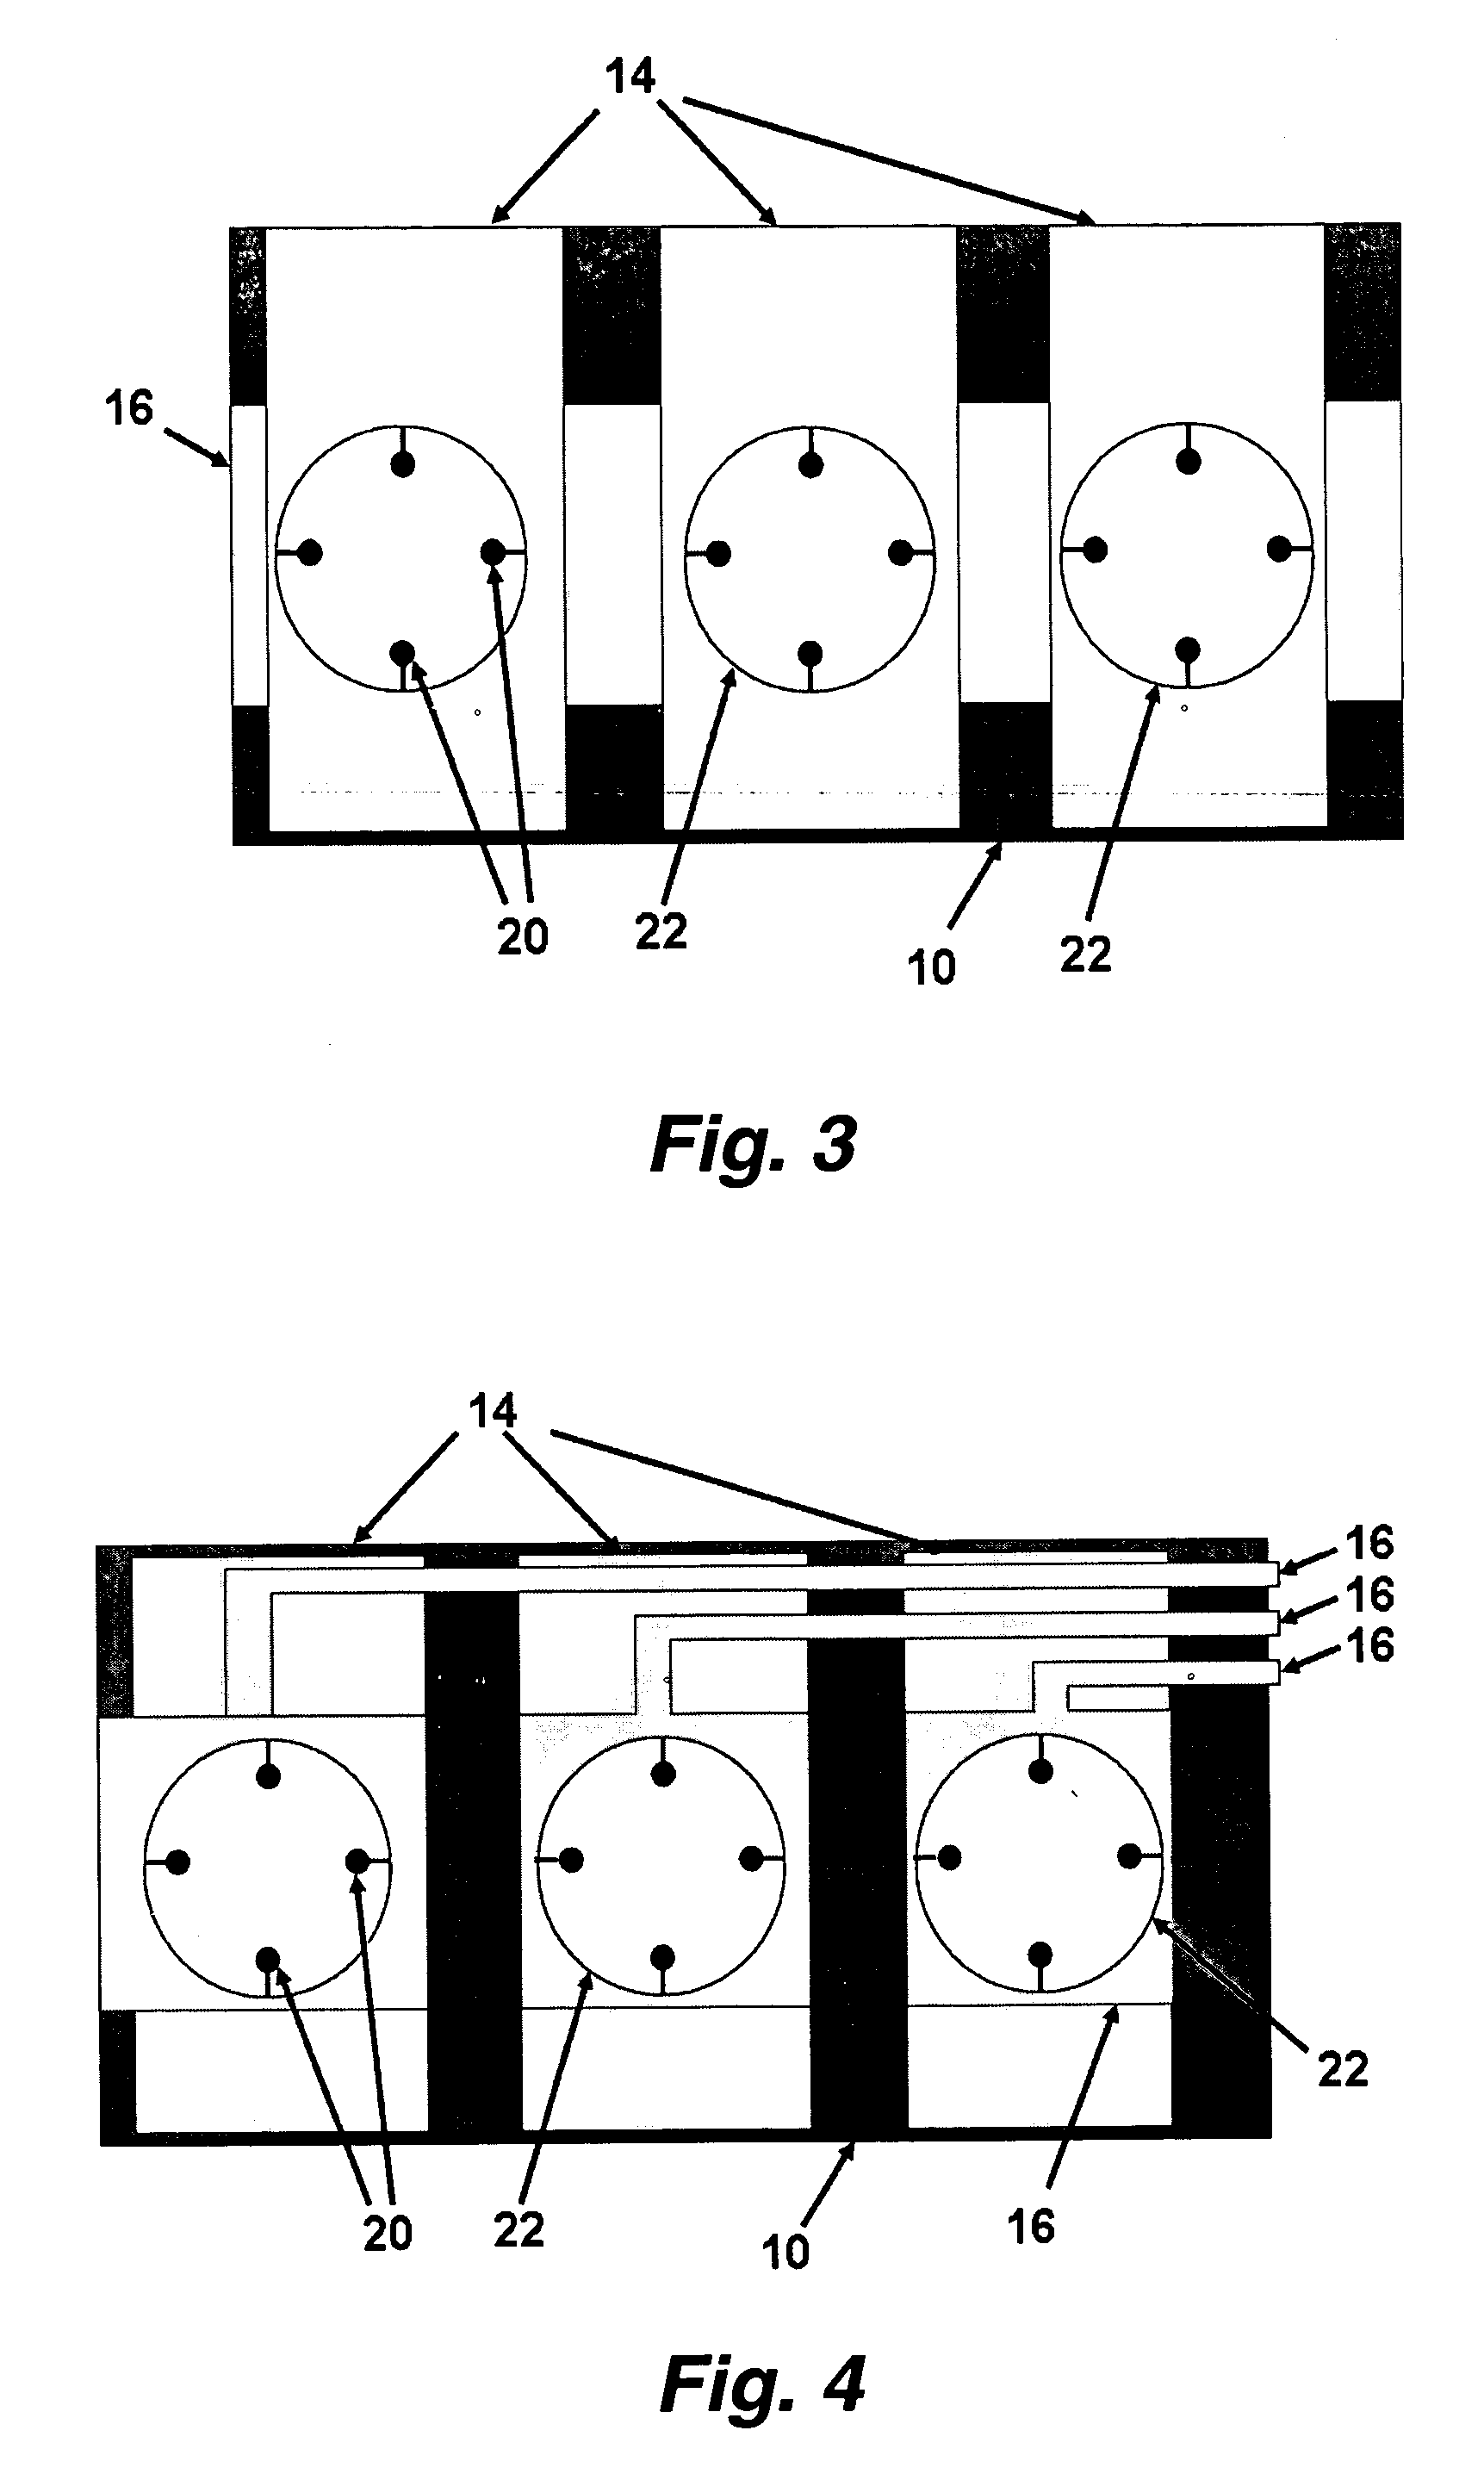 Molehole embedded 3-D crossbar architecture used in electrochemical molecular memory device